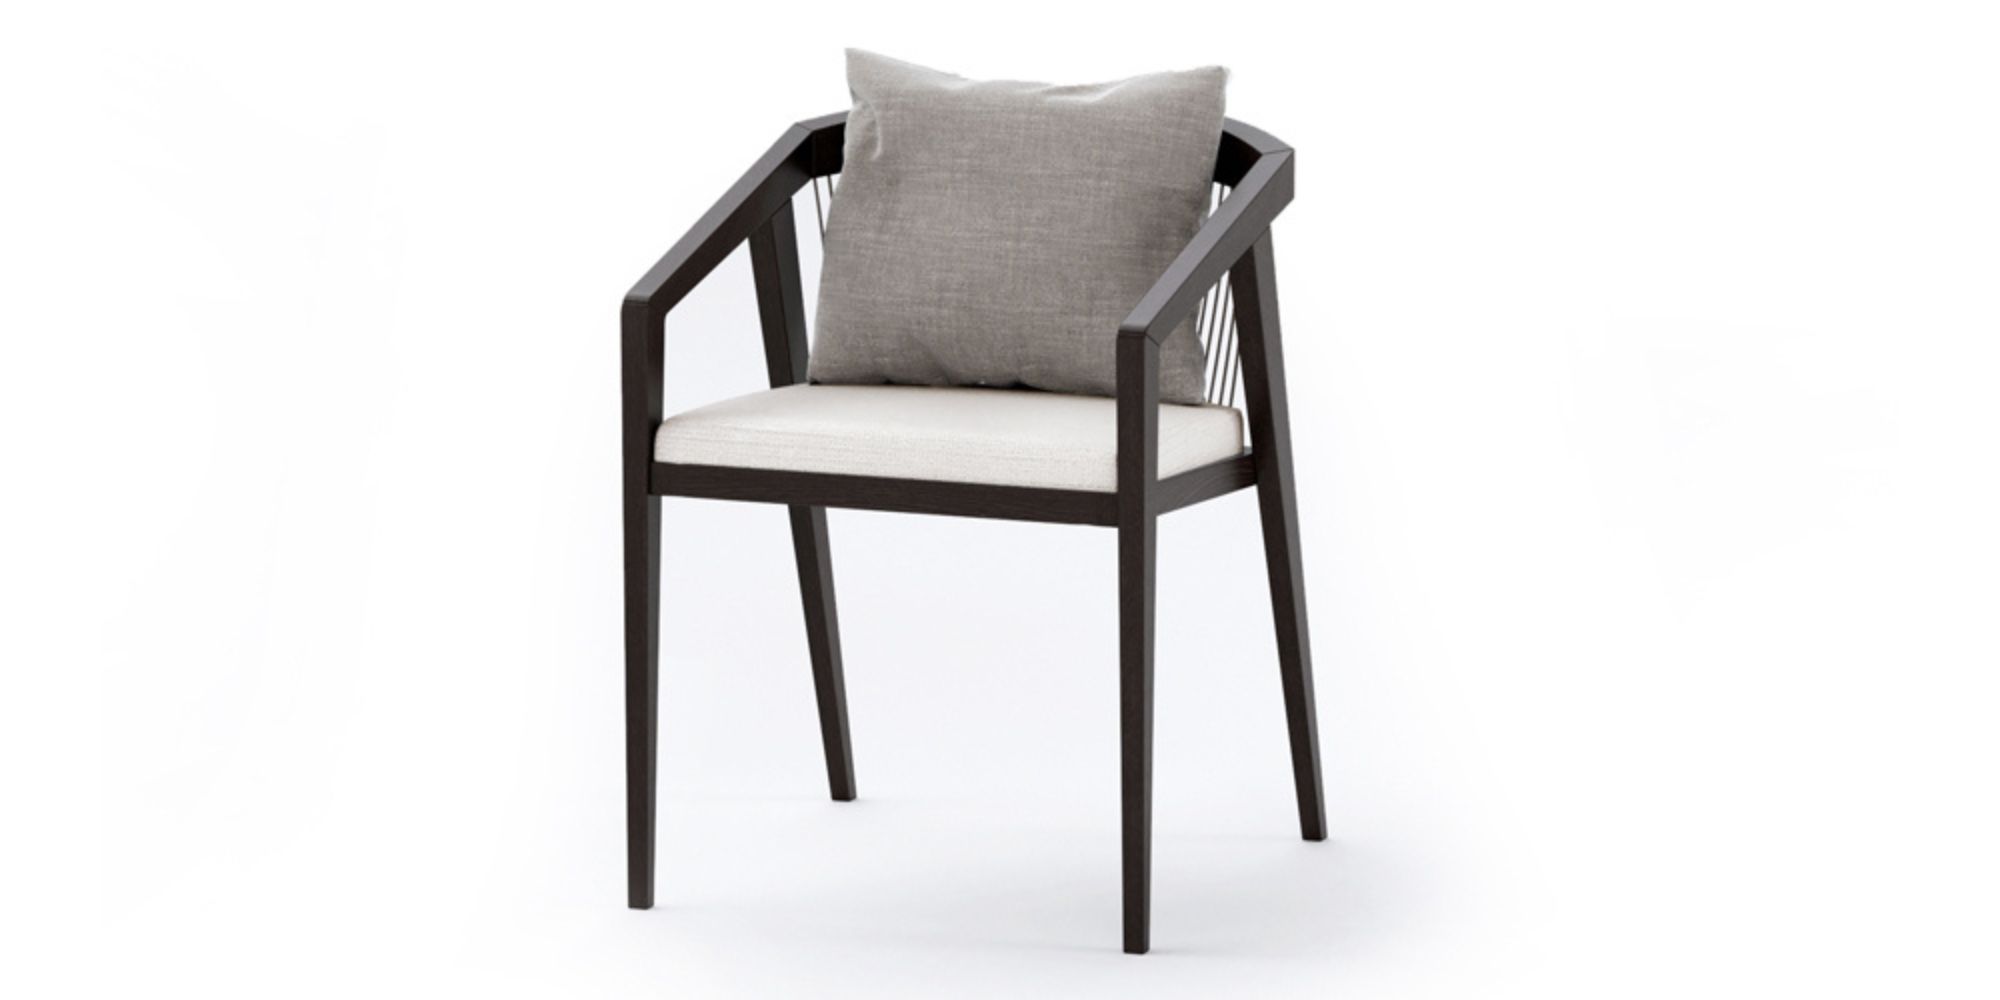 Coronet Armchair in Outdoor Chairs for Coronet collection